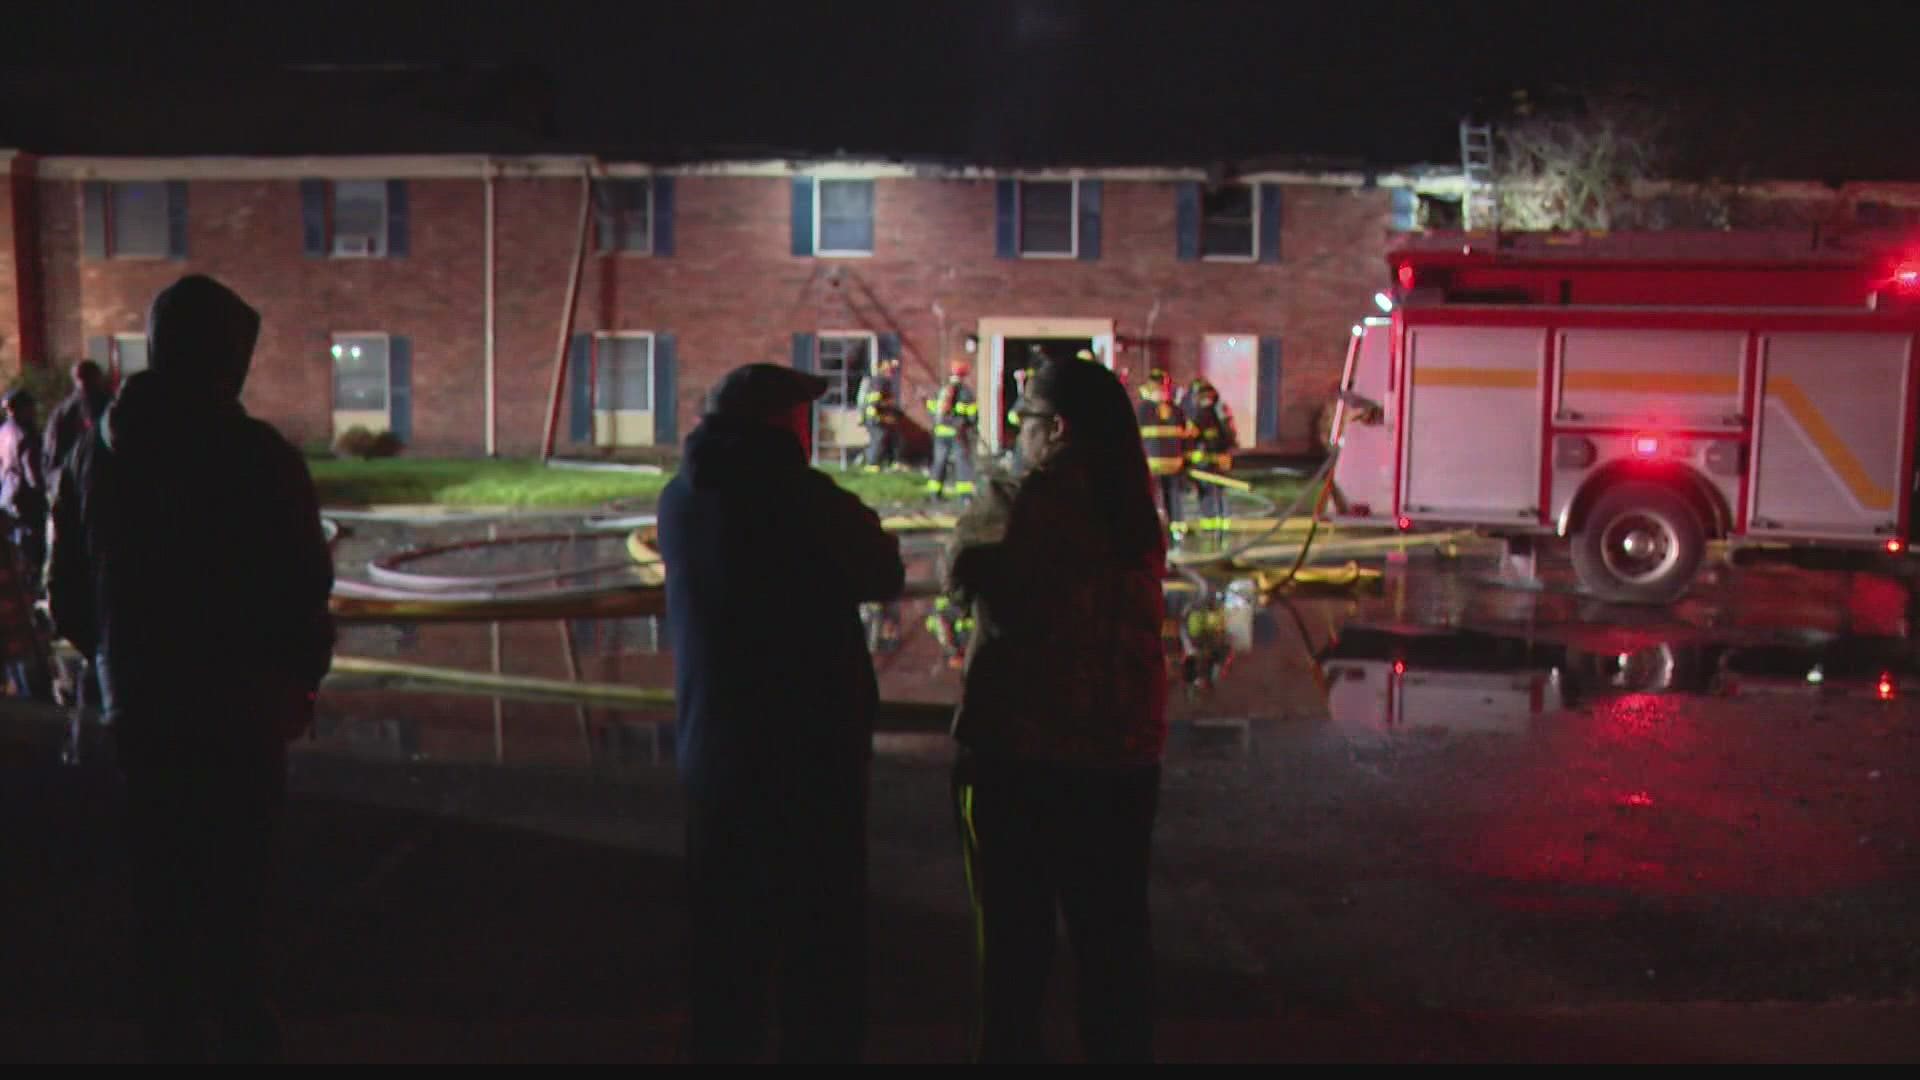 Firefighters have responded to 20 fires at the Lakeside Pointe at Nora apartments since Jan. 1.